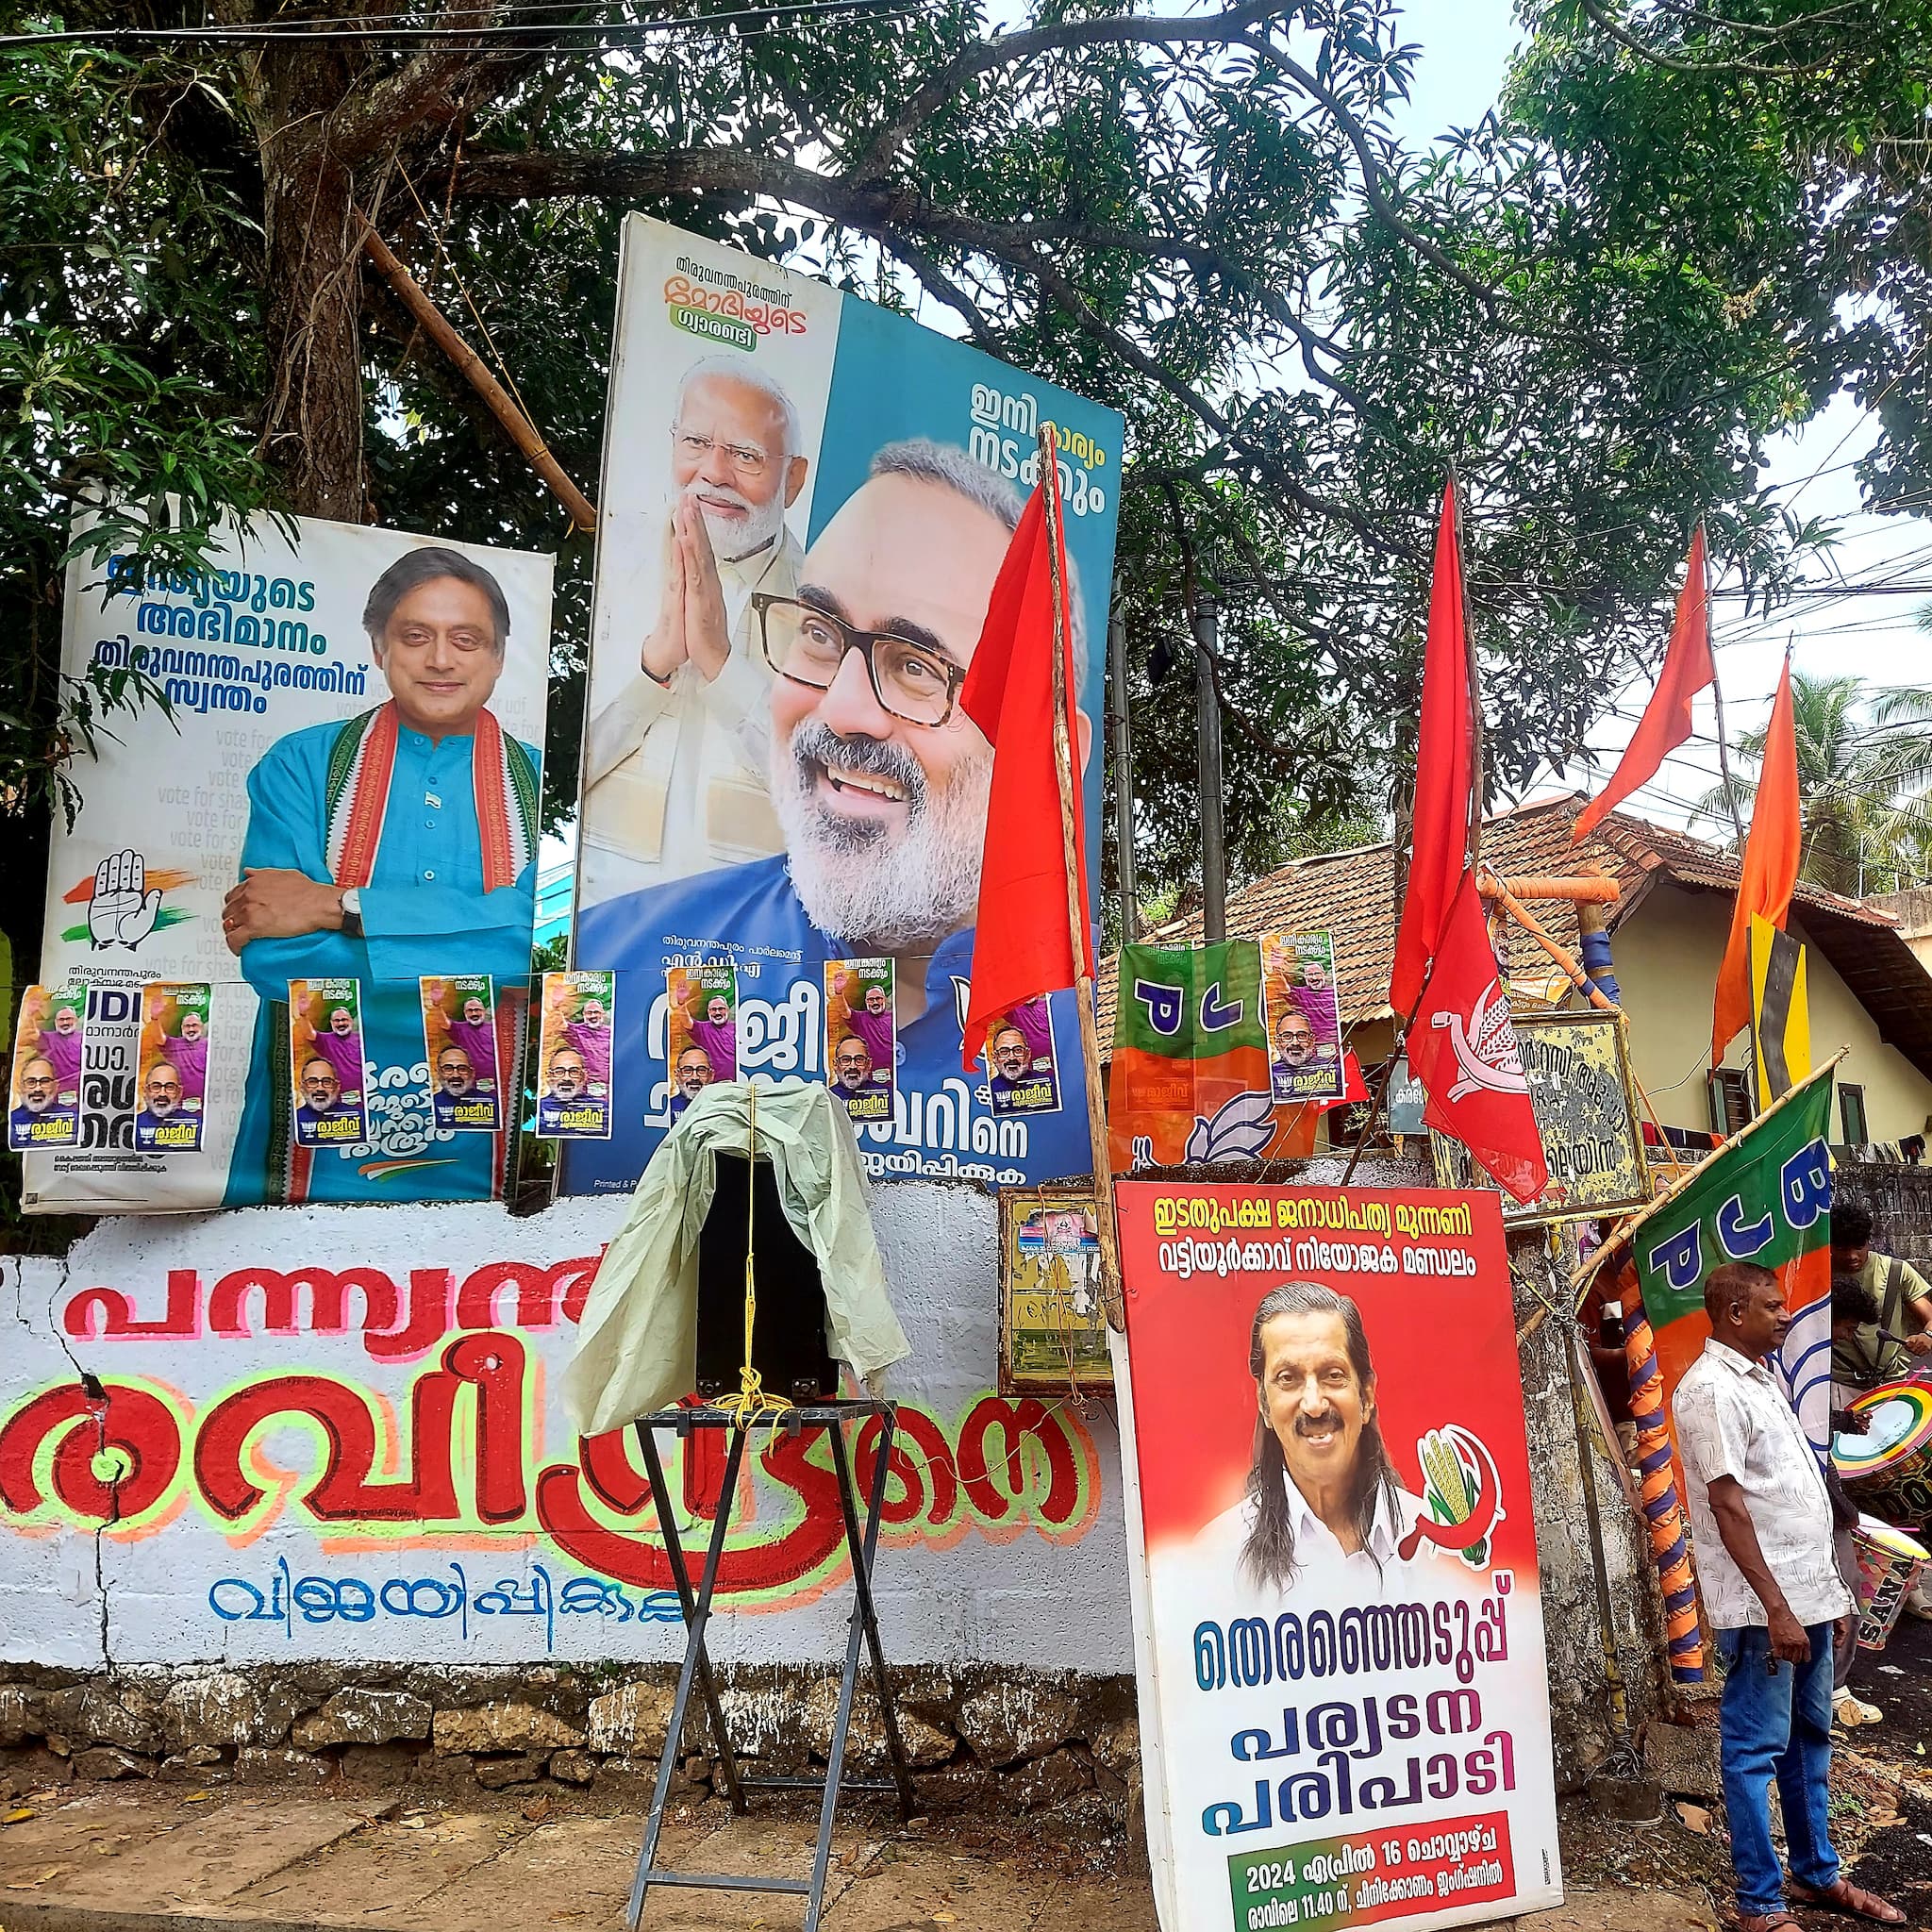 pannian ravindran: thiruvananthapuram's left candidate who's lived in party office for 40 years